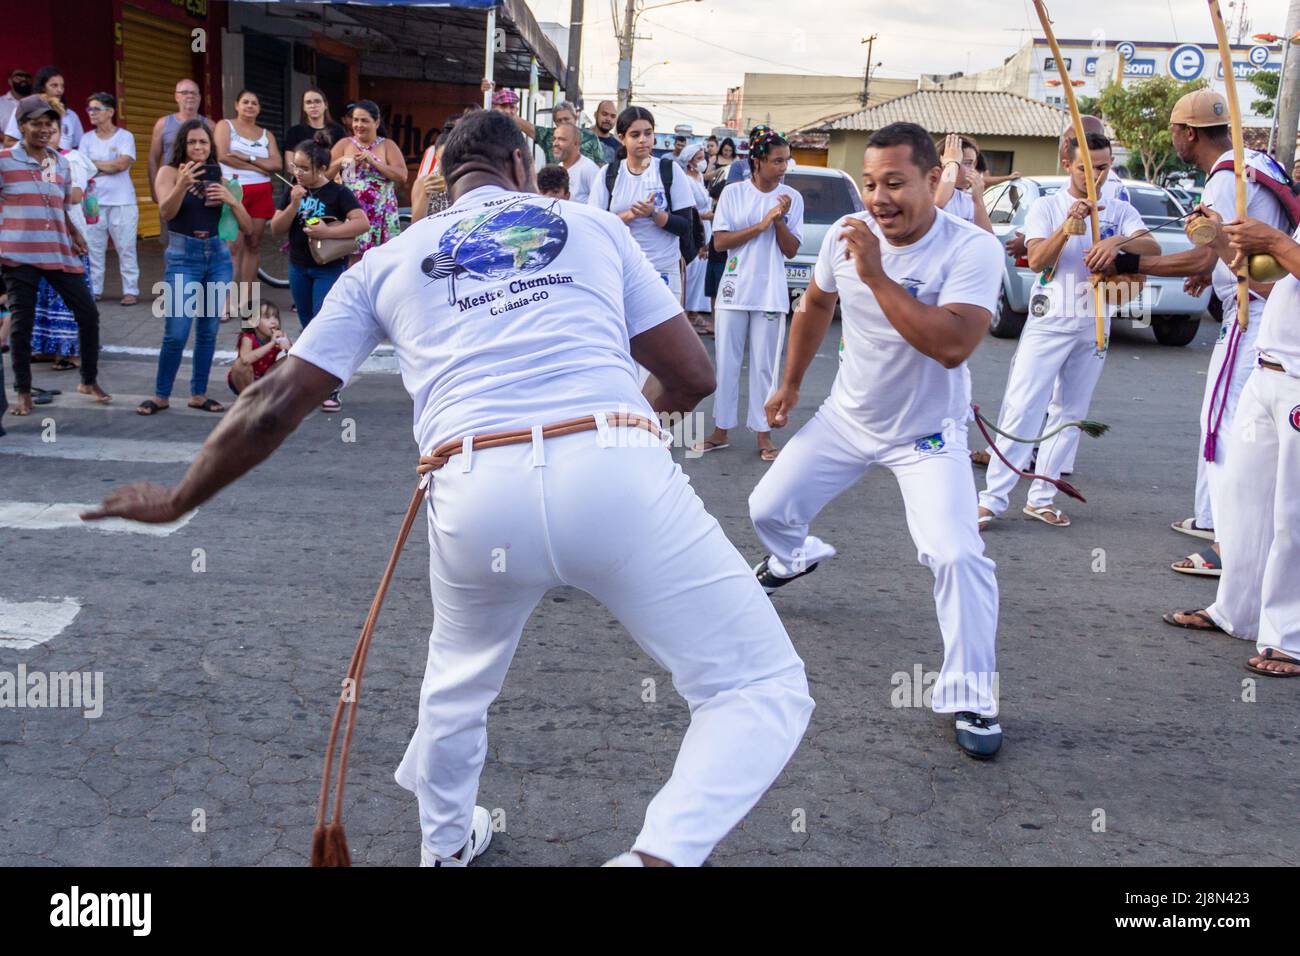 Aparecida de Goiania, Goiás, Brazil – May 15, 2022: A group of people demonstrating the capoeira fight in the Procession of Pretos Velhos. Stock Photo